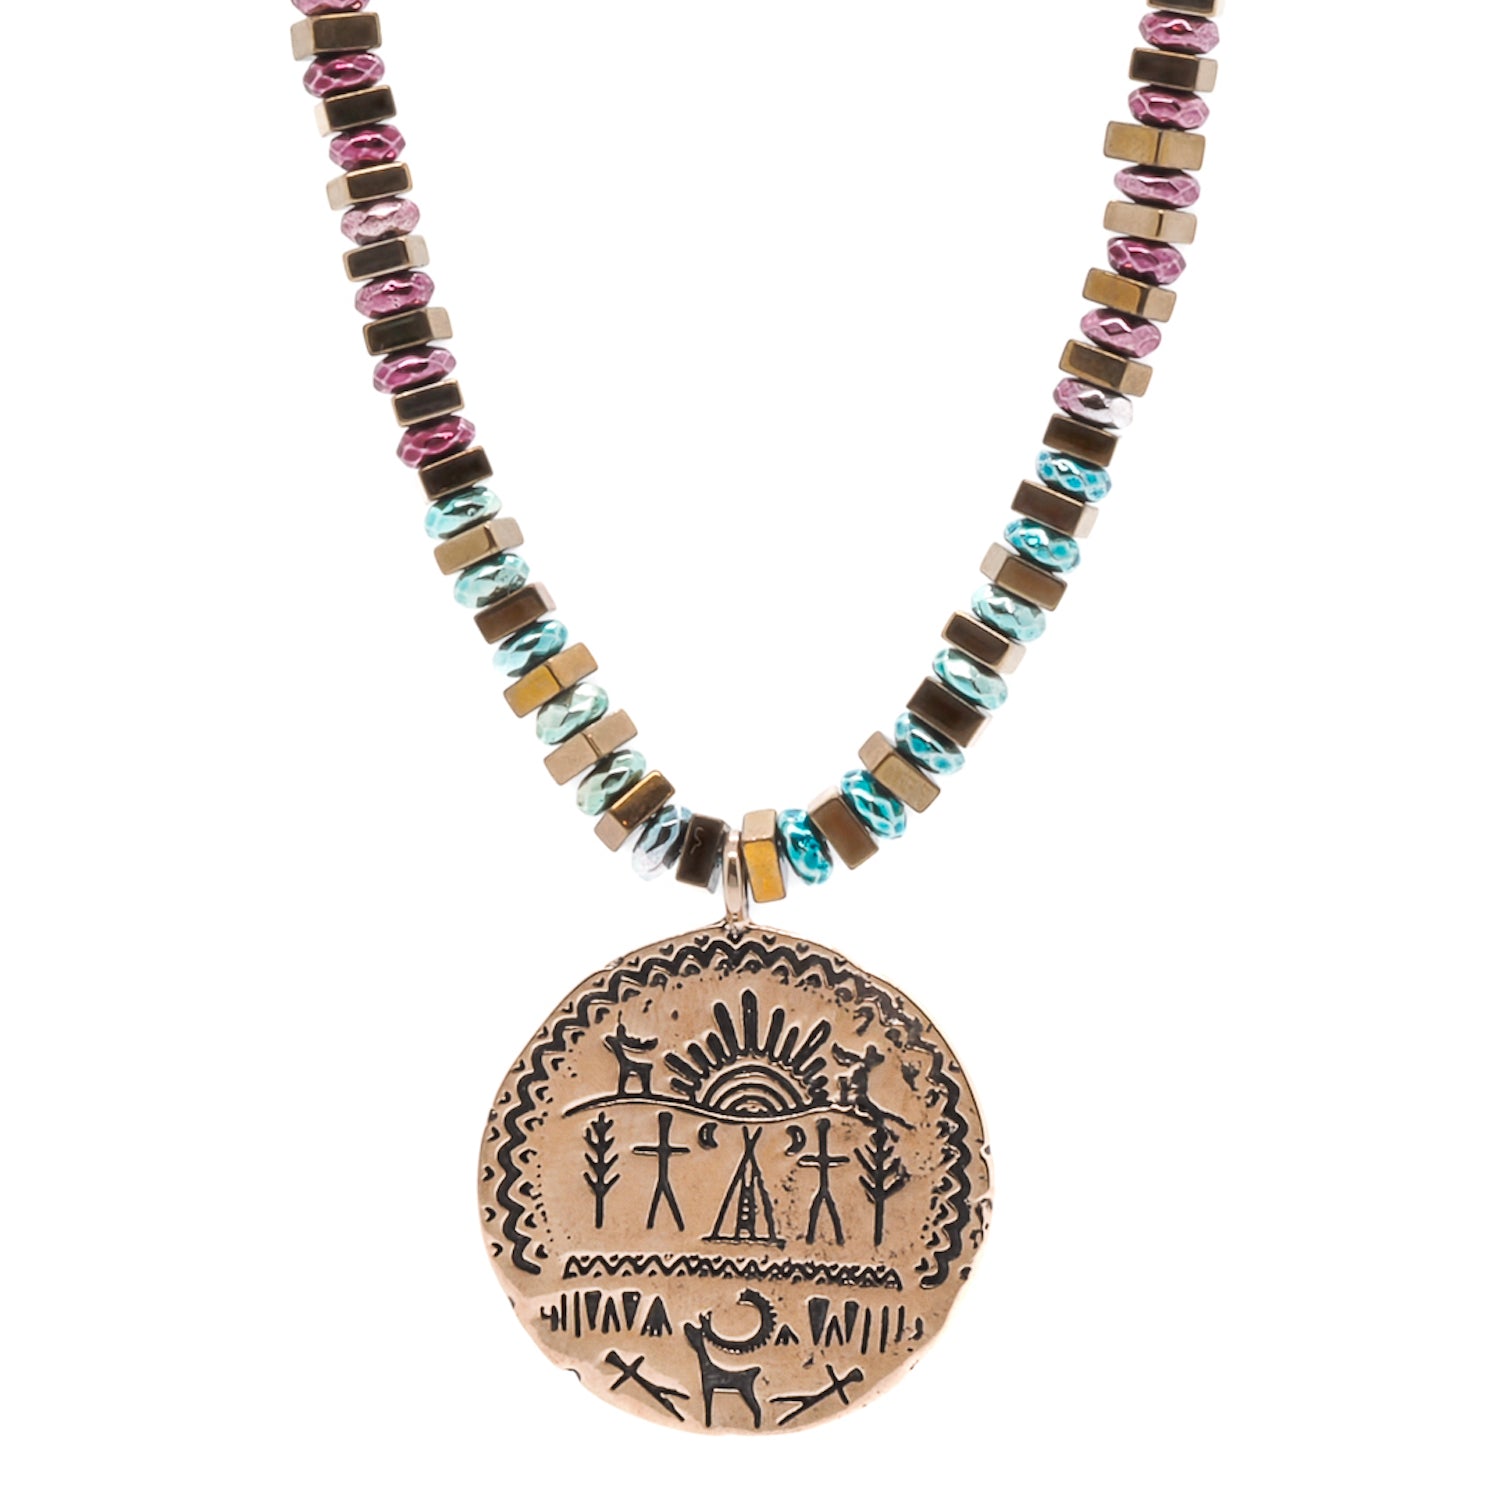 Shamanic Protection Necklace - Handcrafted with Sacred Symbols and Hematite Beads.